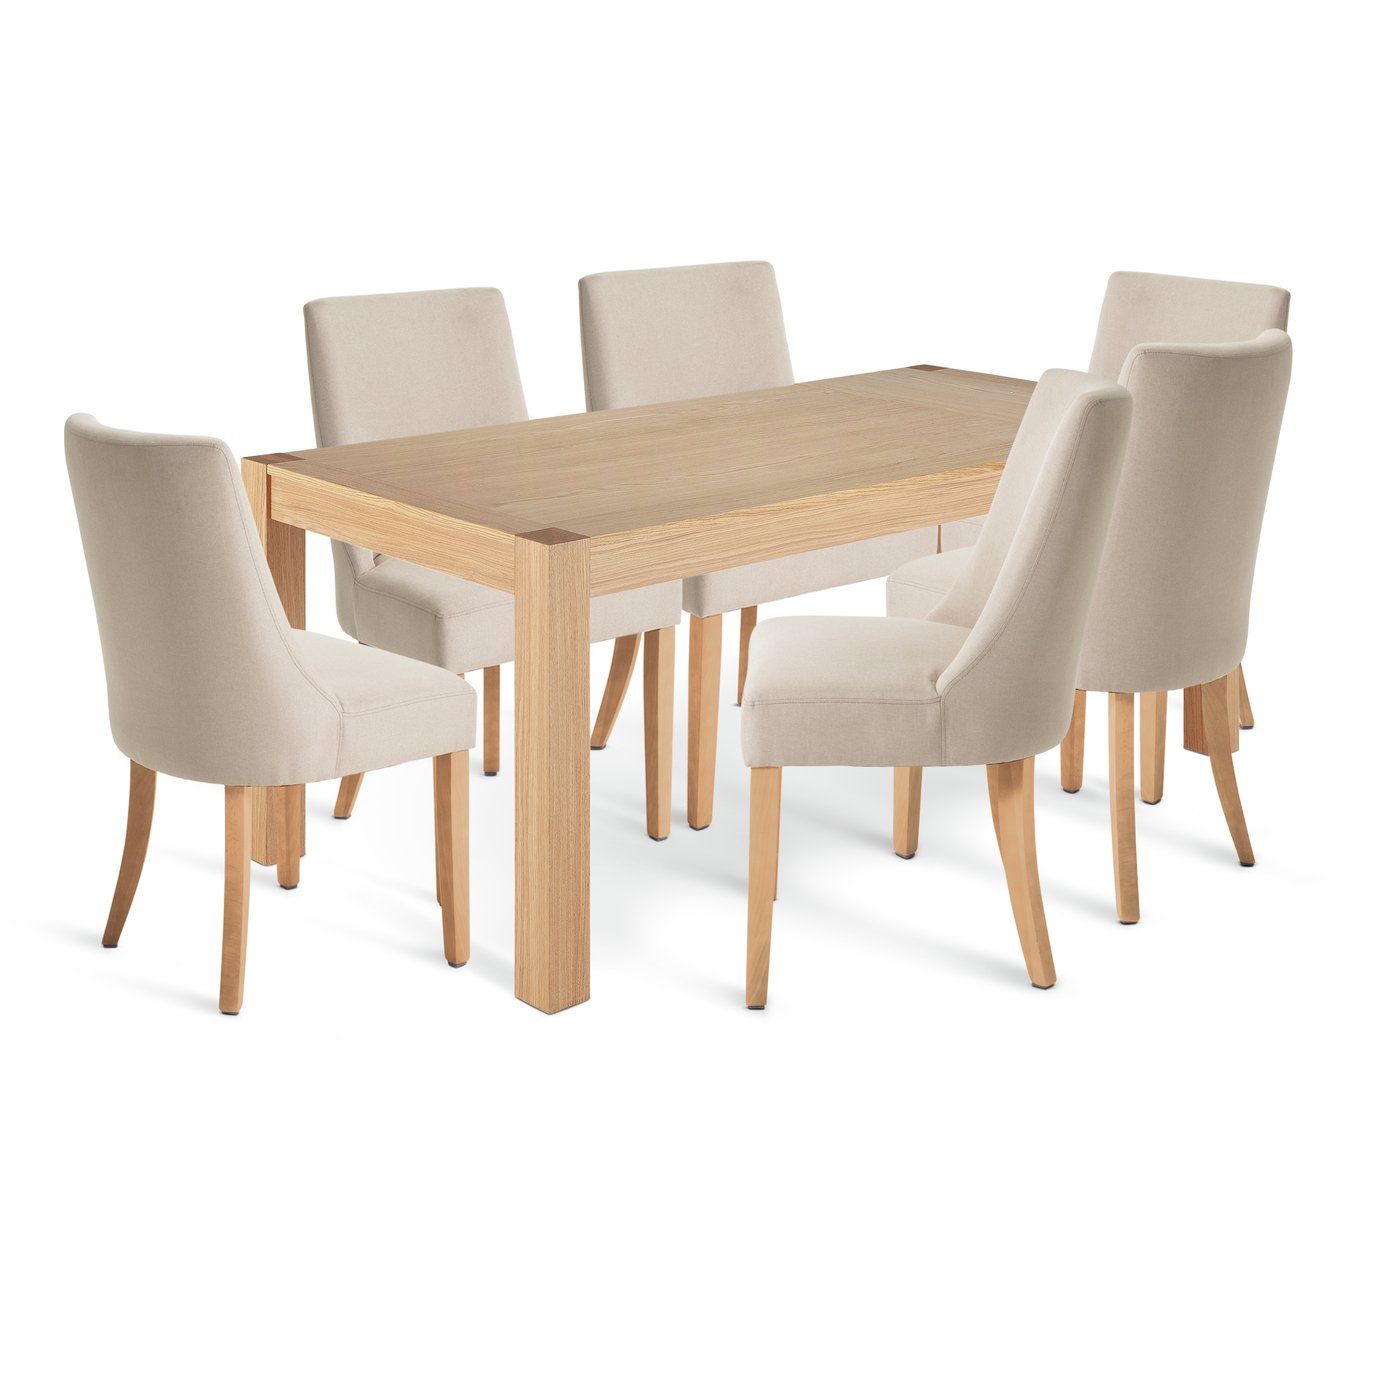 Habitat Alston Wood Dining Table & 6 Alec Oatmeal Chairs